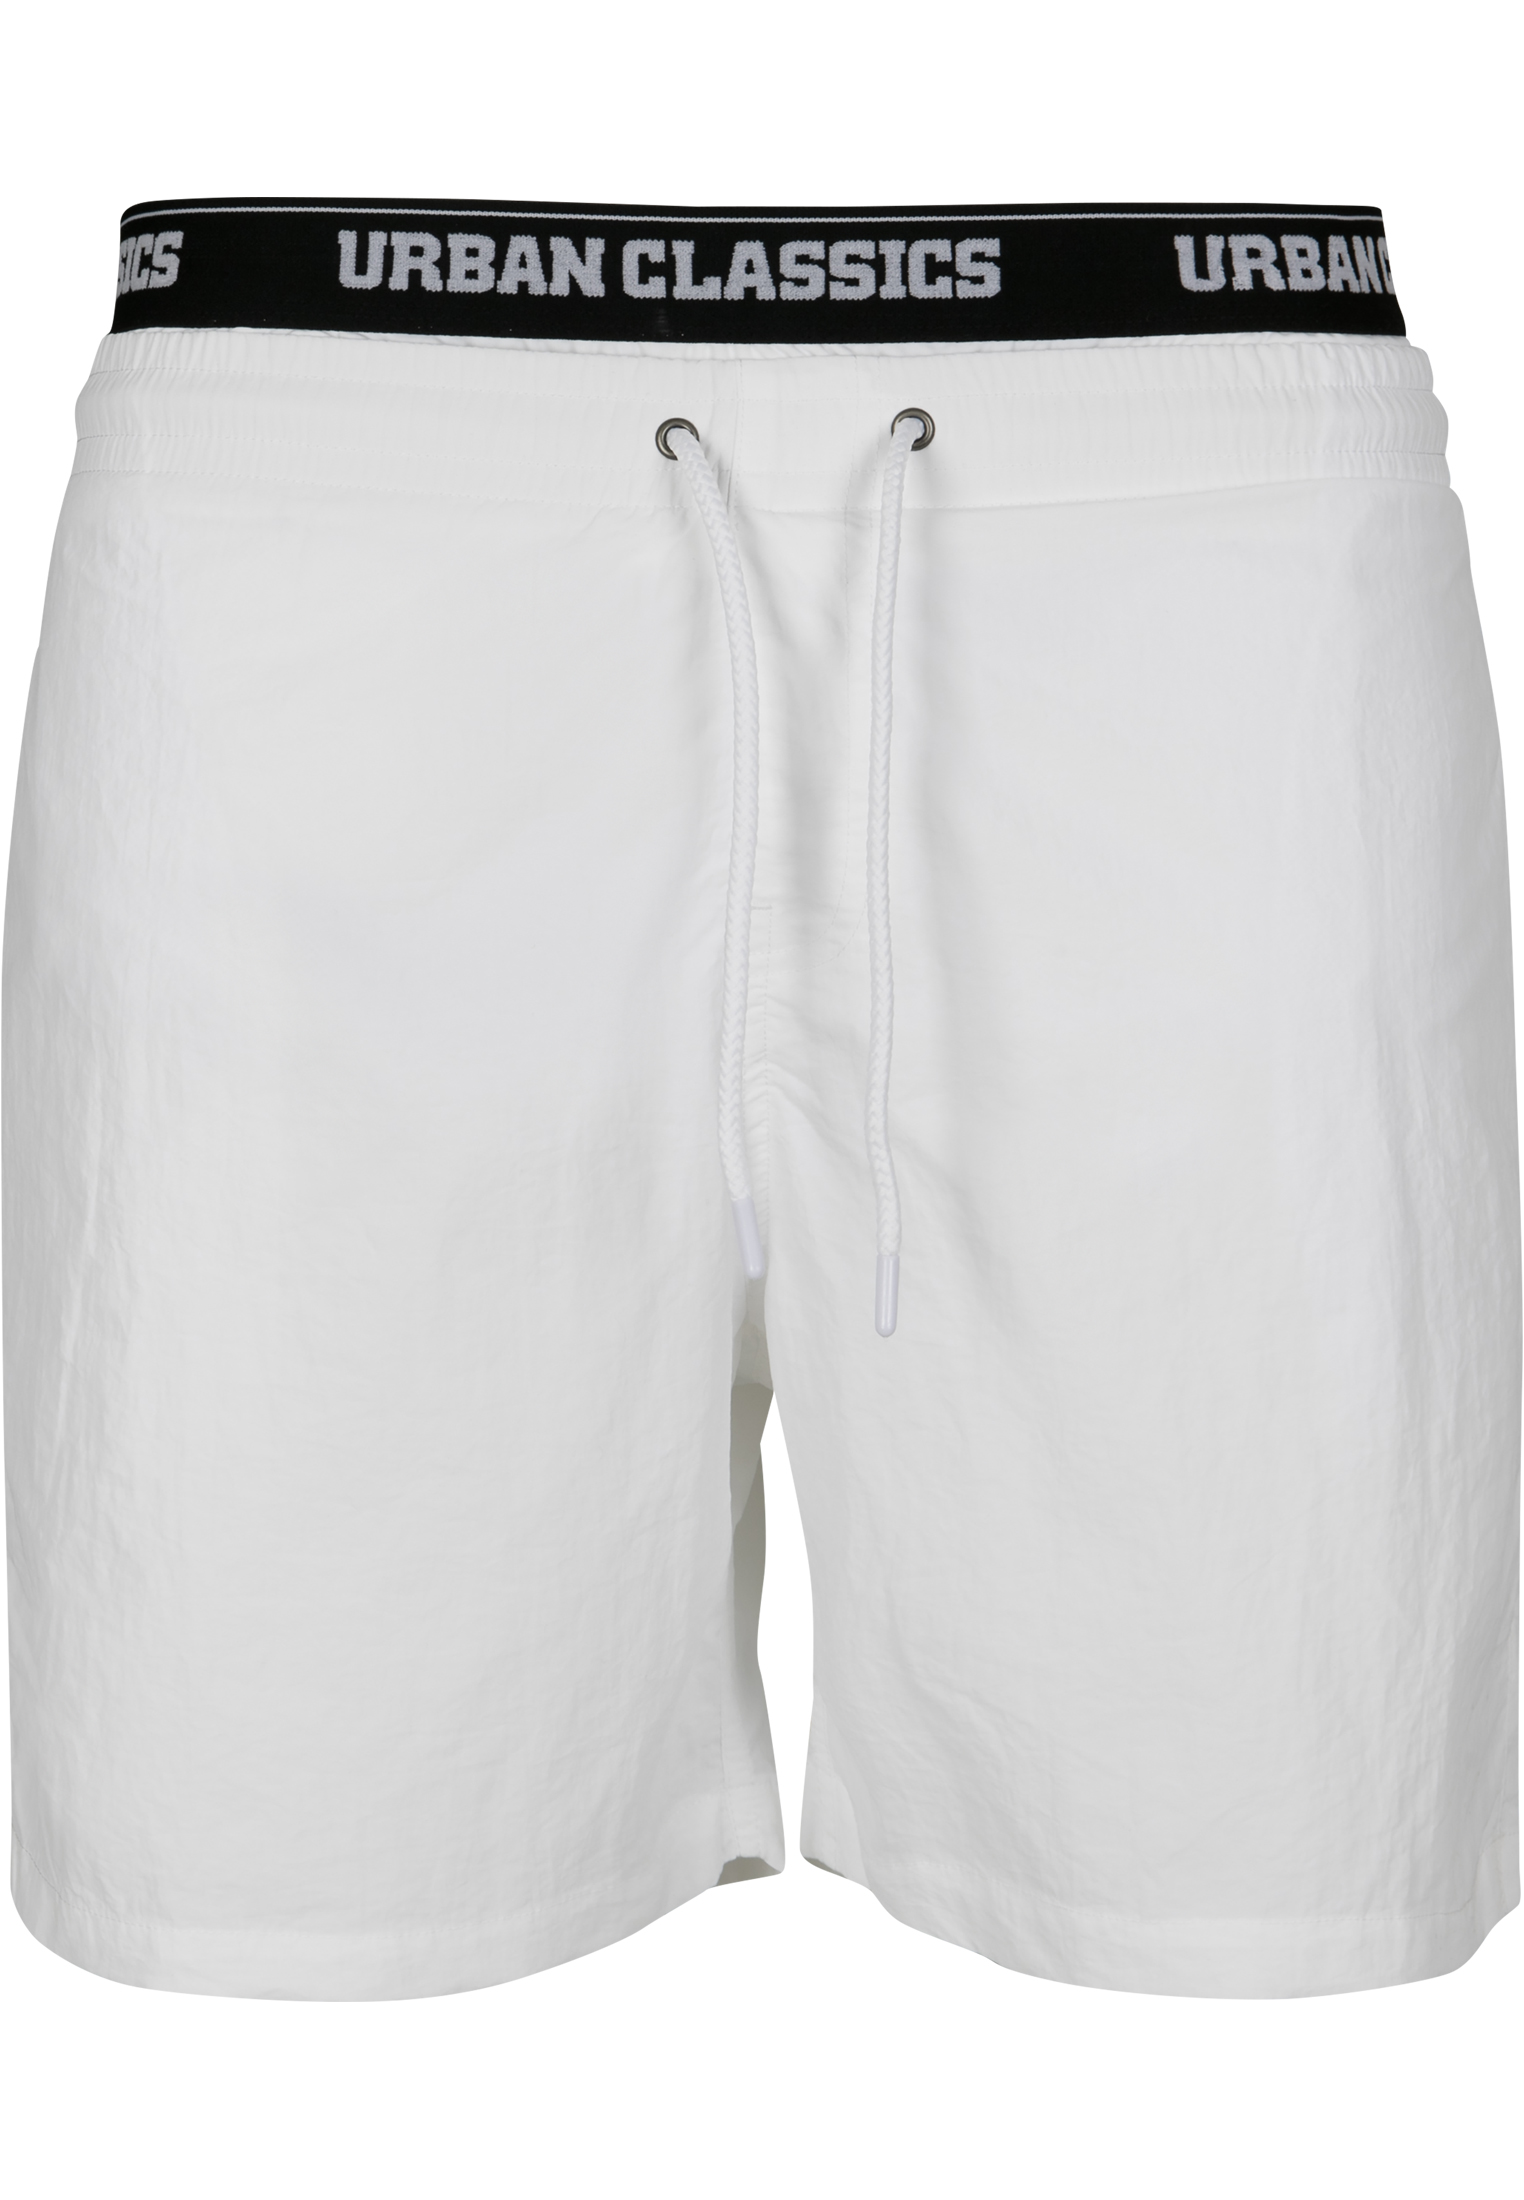 Bademode Two in One Swim Shorts in Farbe wht/blk/wht